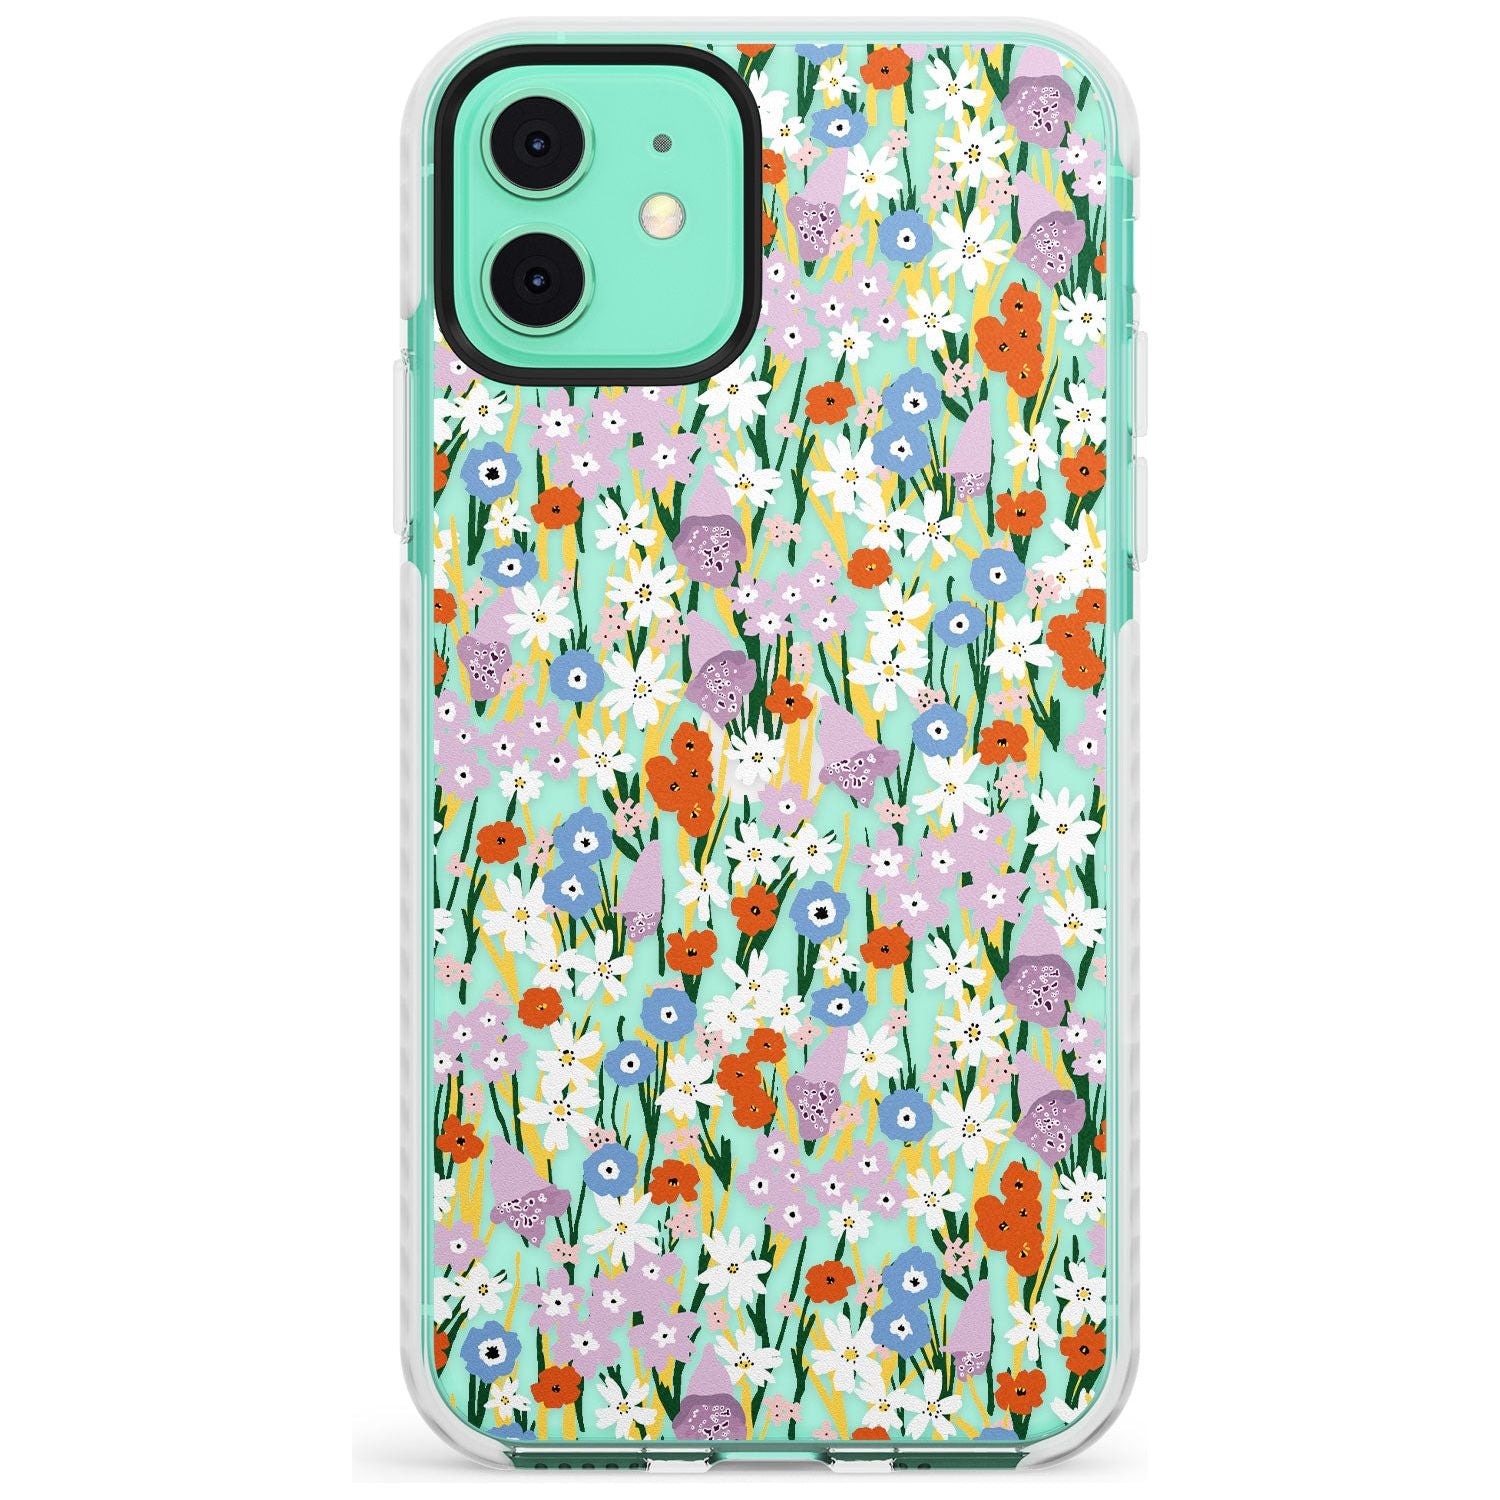 Energetic Floral Mix: Transparent Slim TPU Phone Case for iPhone 11